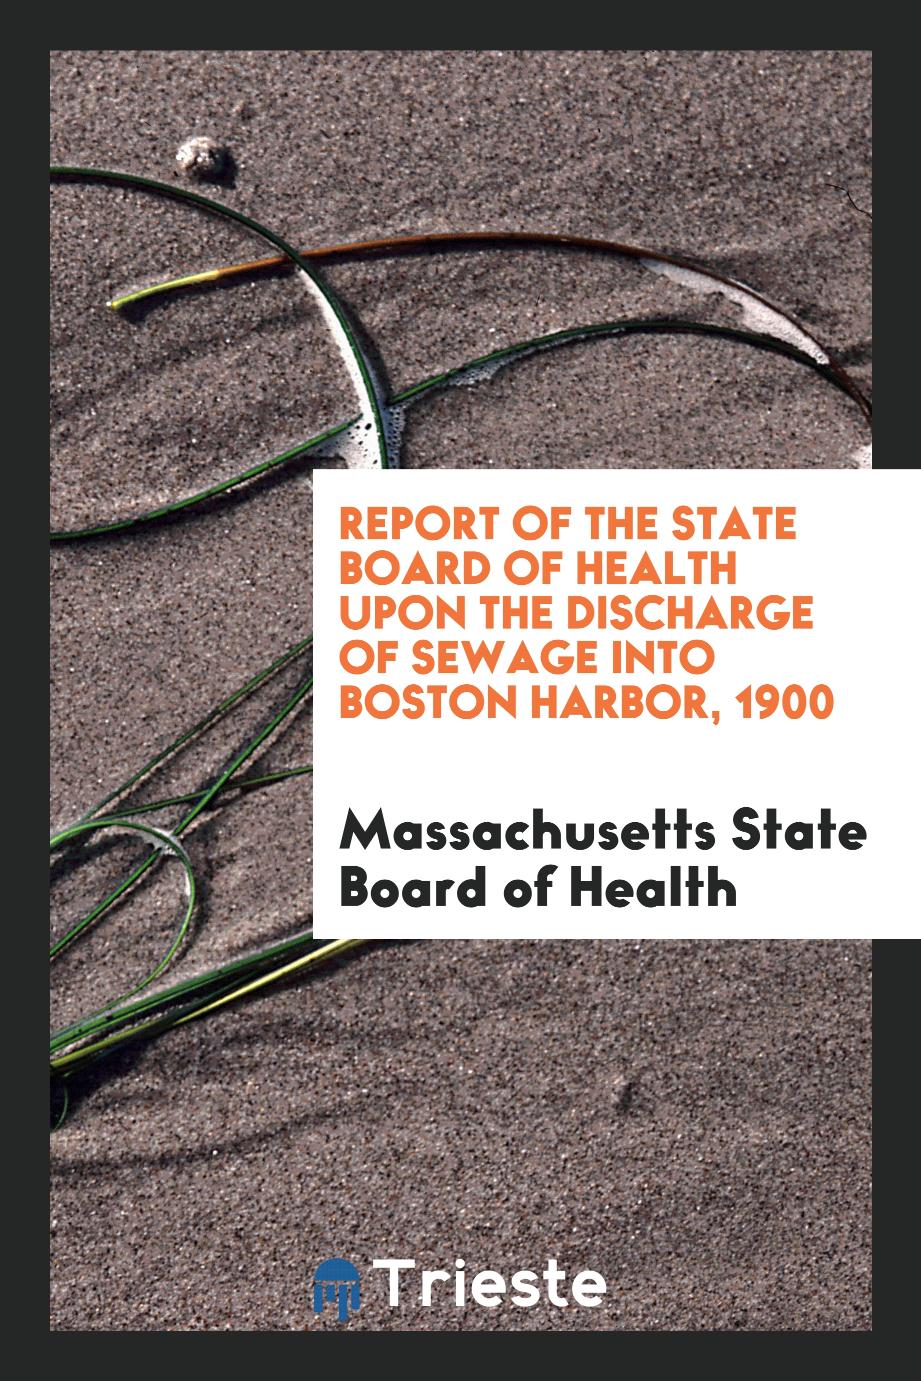 Report of the State Board of Health Upon the Discharge of Sewage Into Boston Harbor, 1900